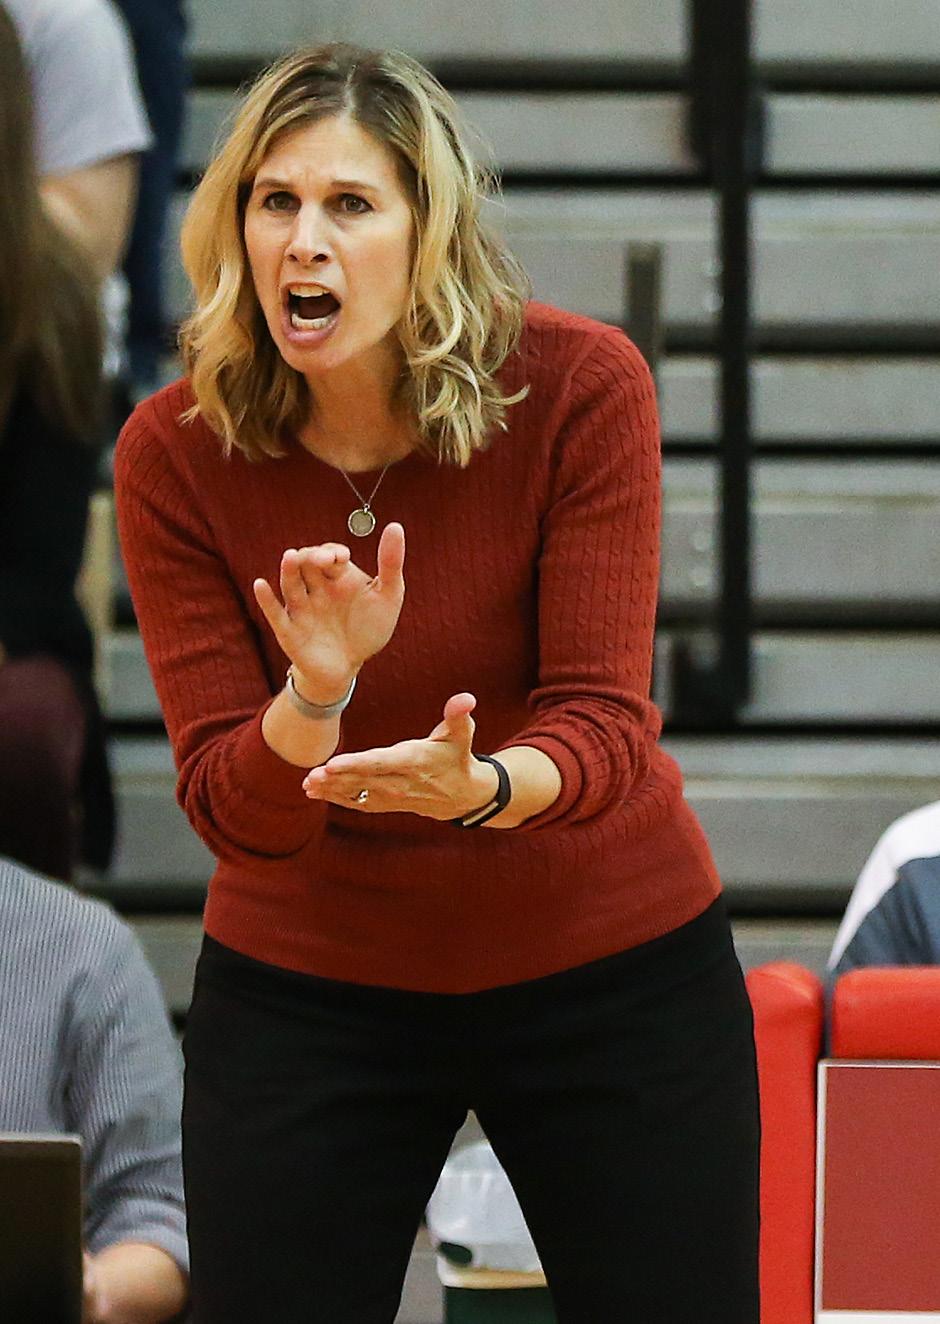 , 1996 Sherry Dunbar-Kruzan, a Ball State University graduate and Indiana native, has established a track record of success both as a player and a coach.